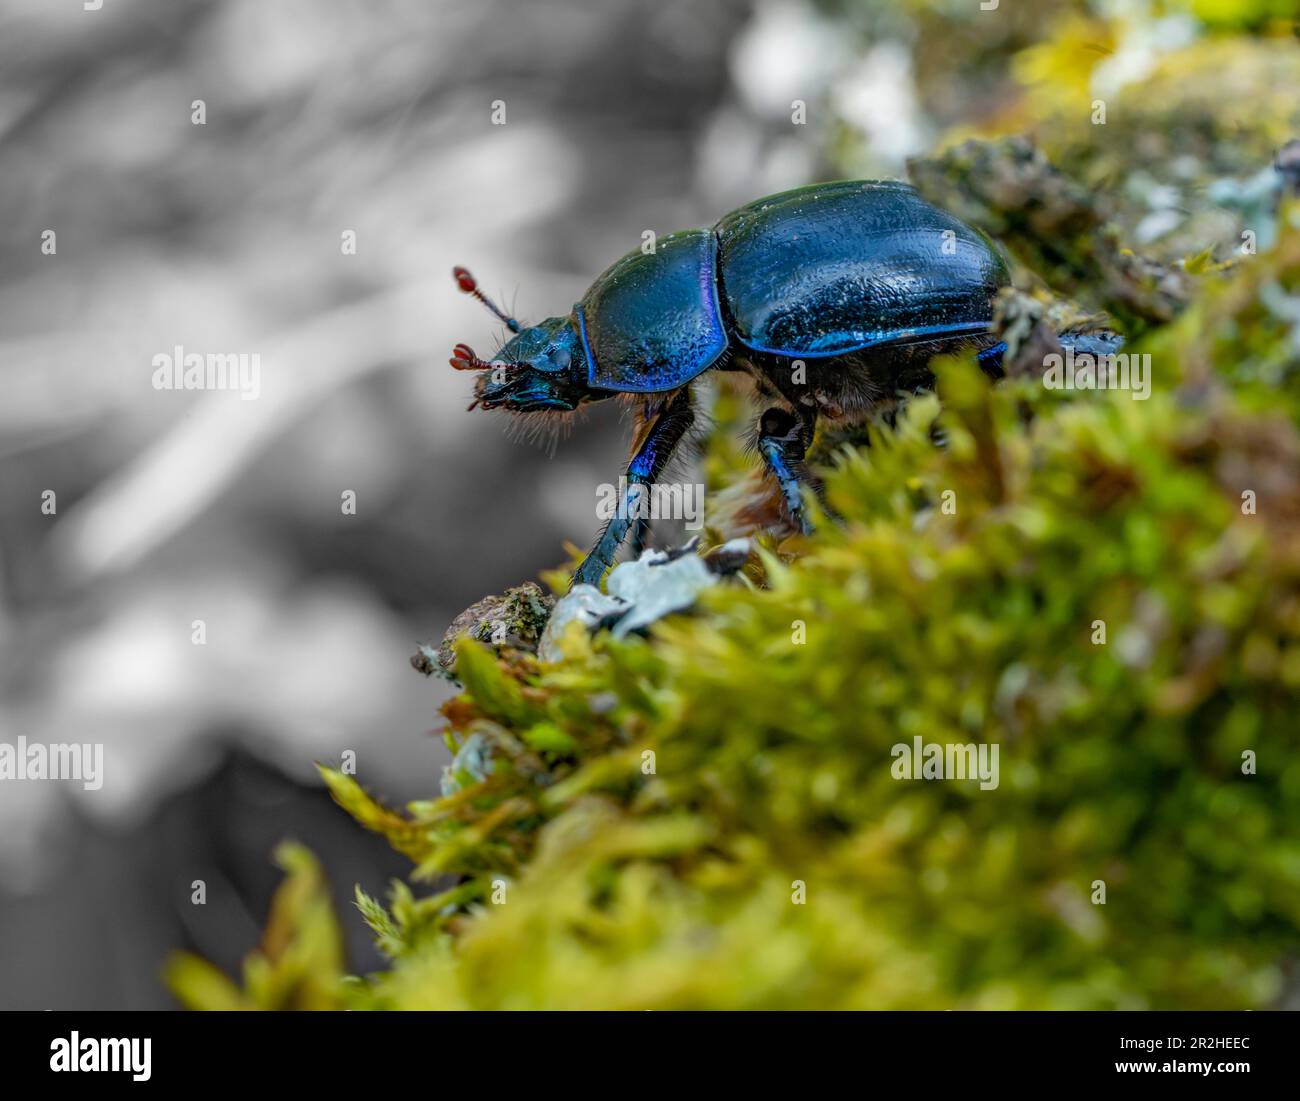 Low angle sideways shot of a blue metallic iridescent earth-boring dung beetle Stock Photo